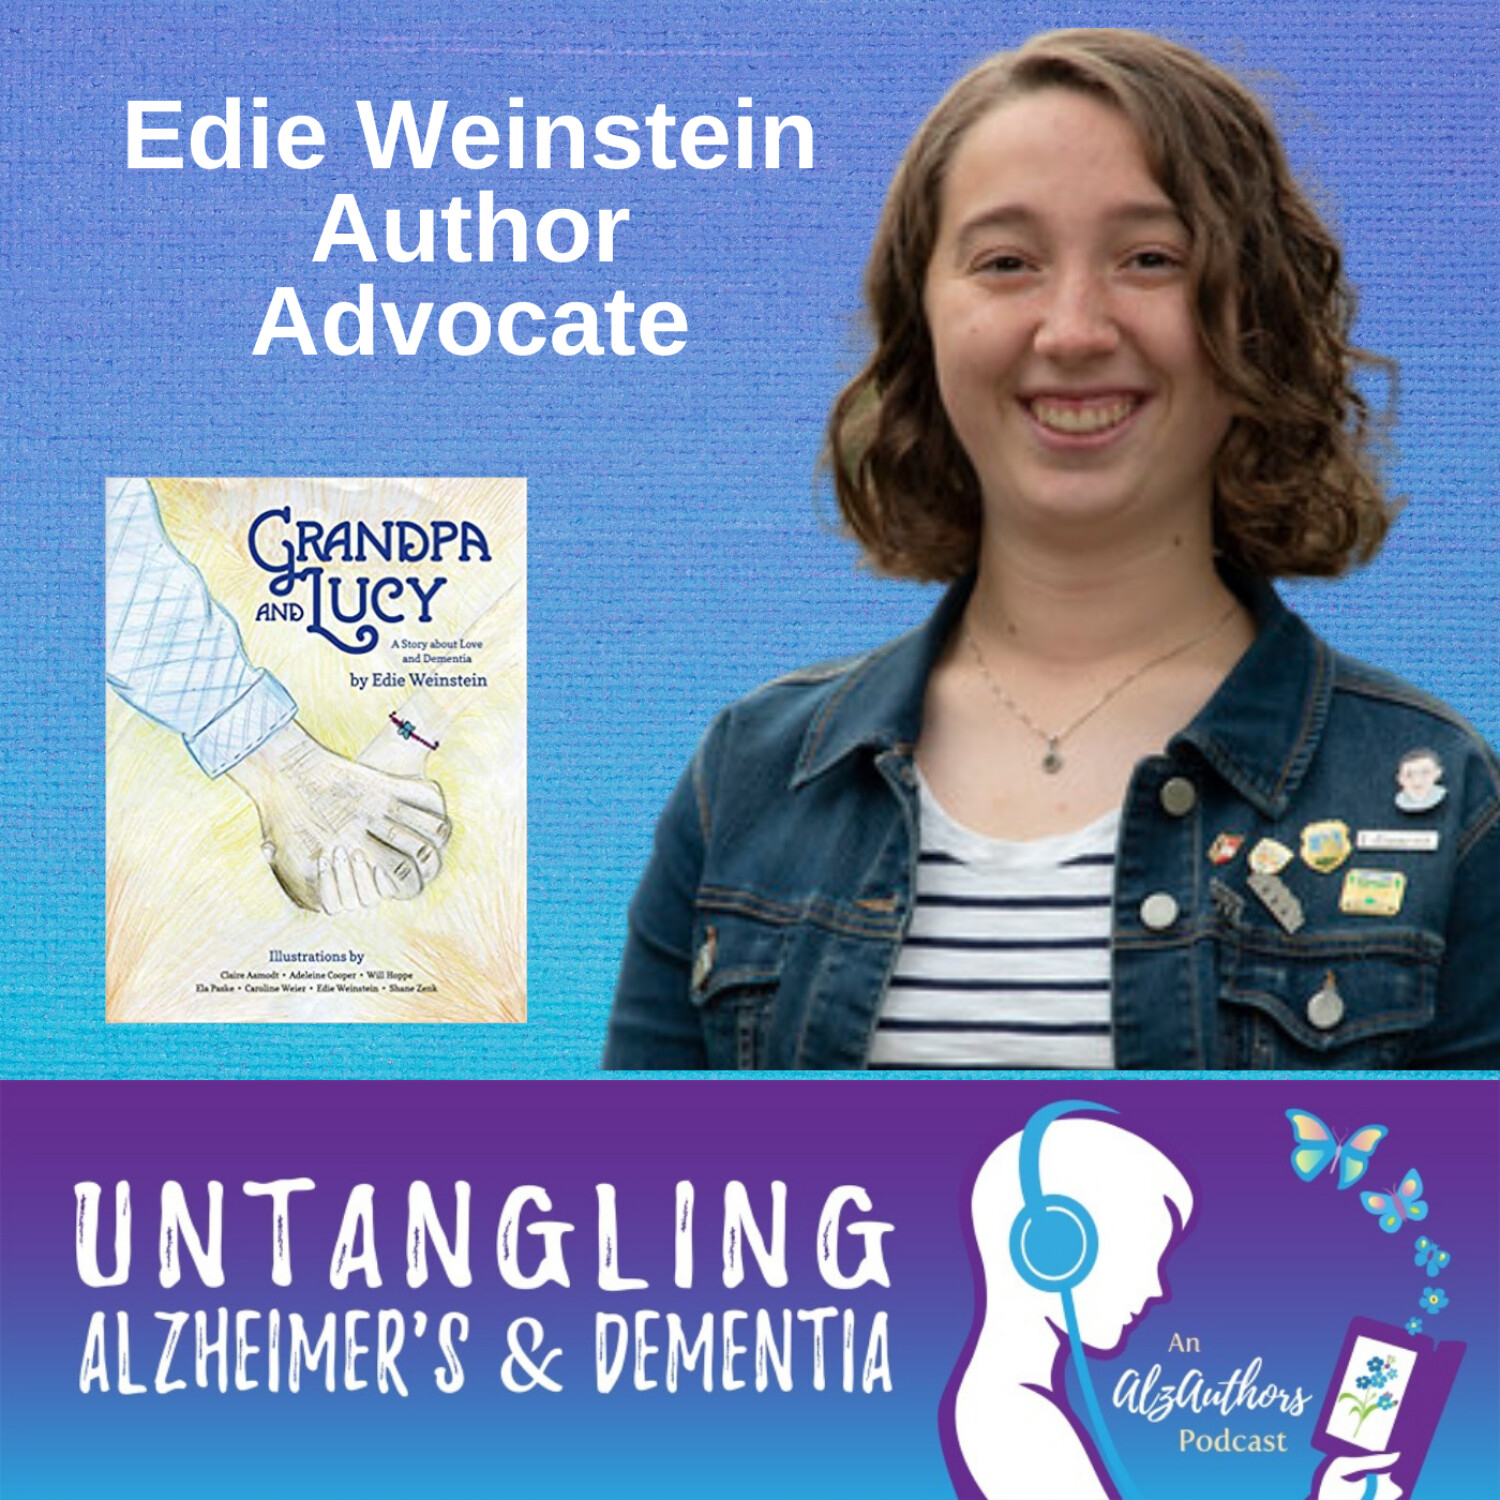 Edie Weinstein Untangles How Children’s Books Can Diminish Barriers Caused by Dementia